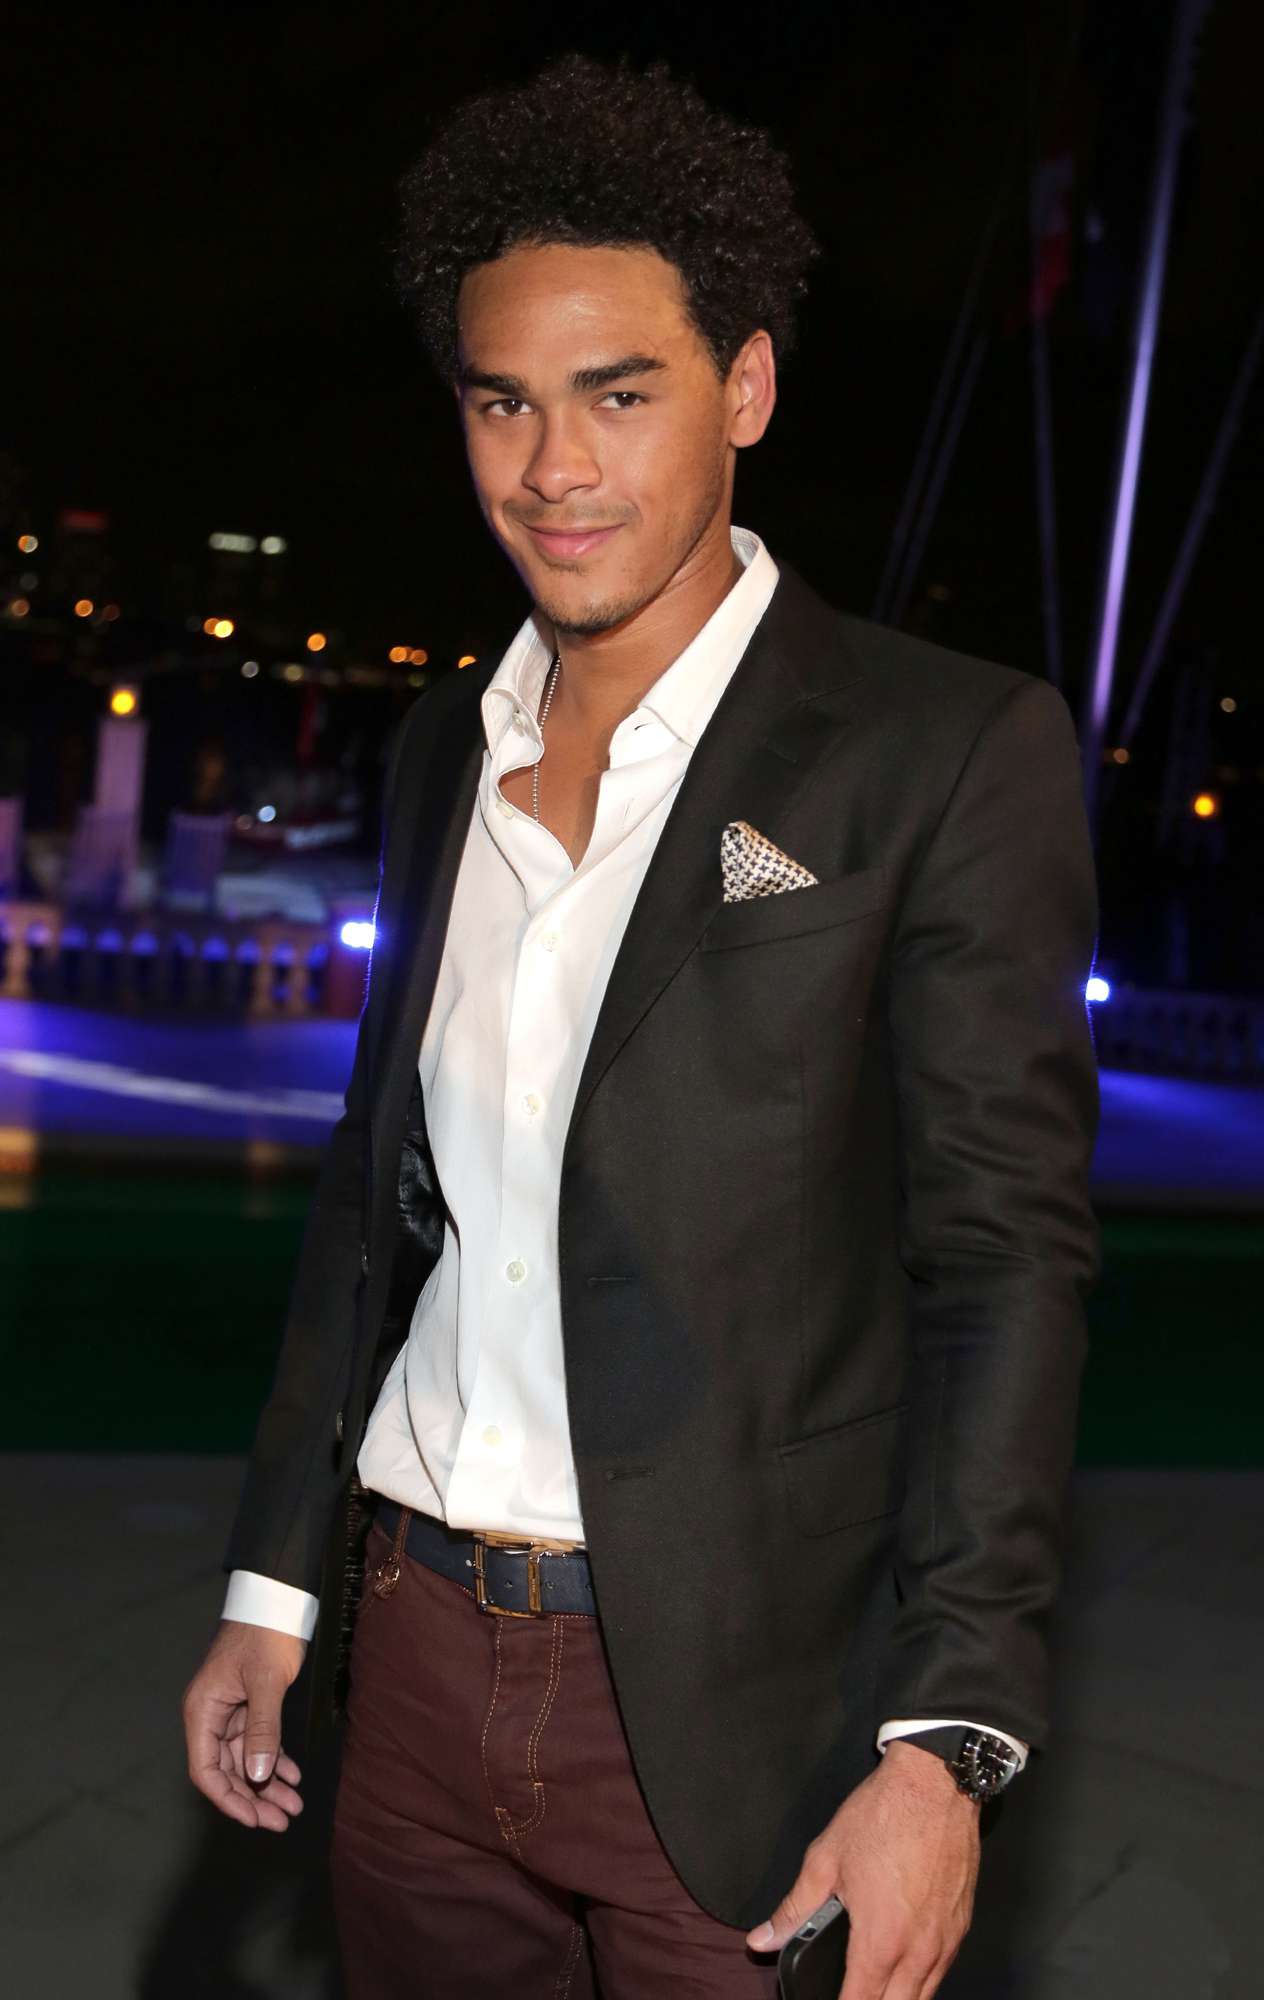 Trey Smith attends the Art of Fusion on Star Island at Miami Beach on December 6, 2013 in Miami, Florida